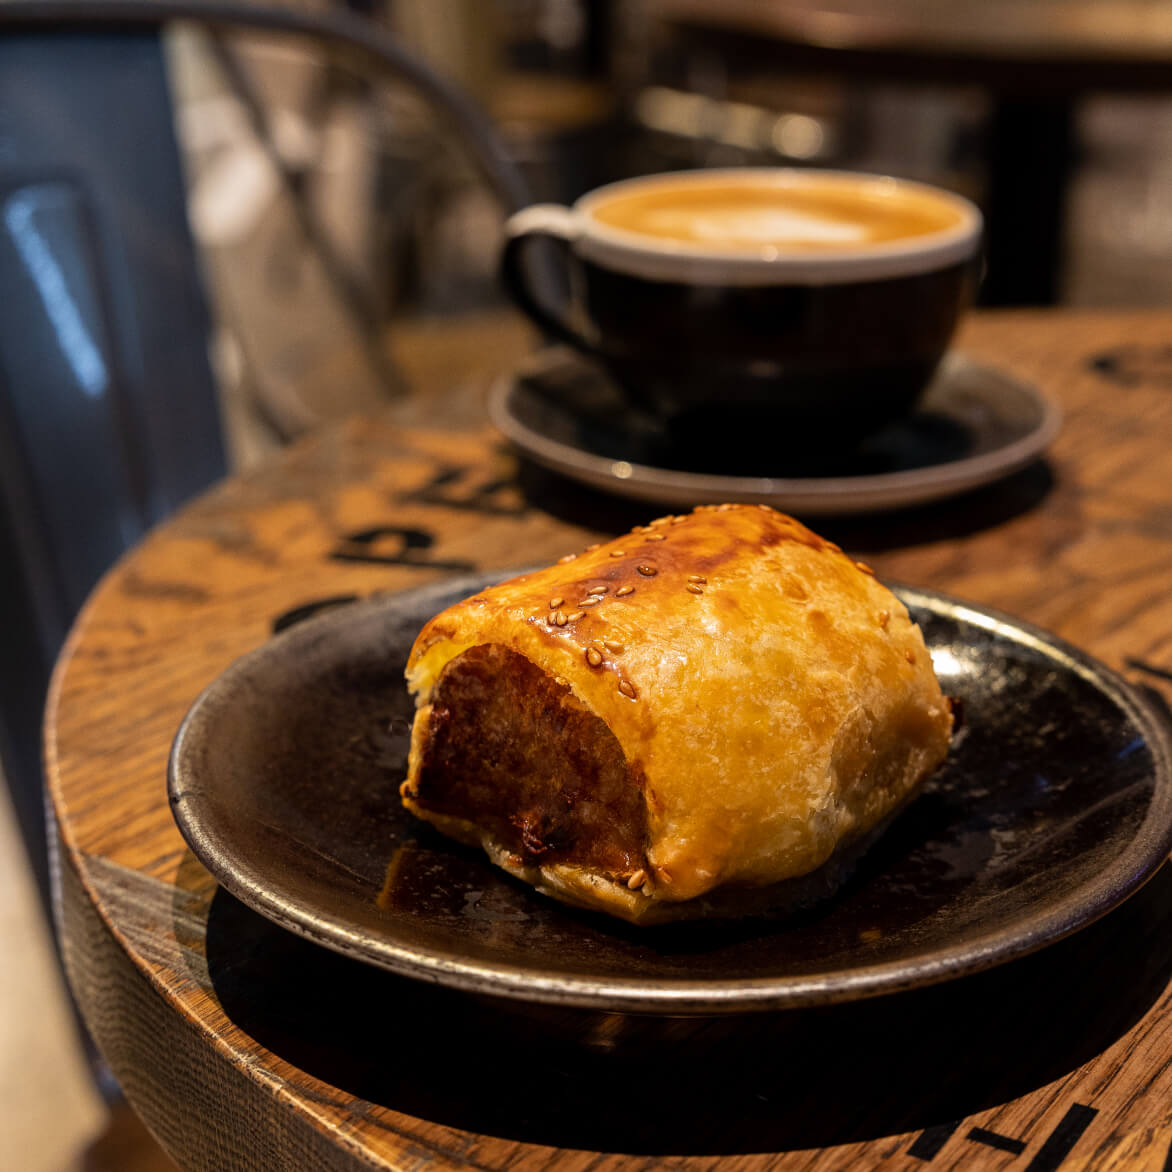 A fresh sausage roll available at the Cooperage Café with a blurred coffee in the background.